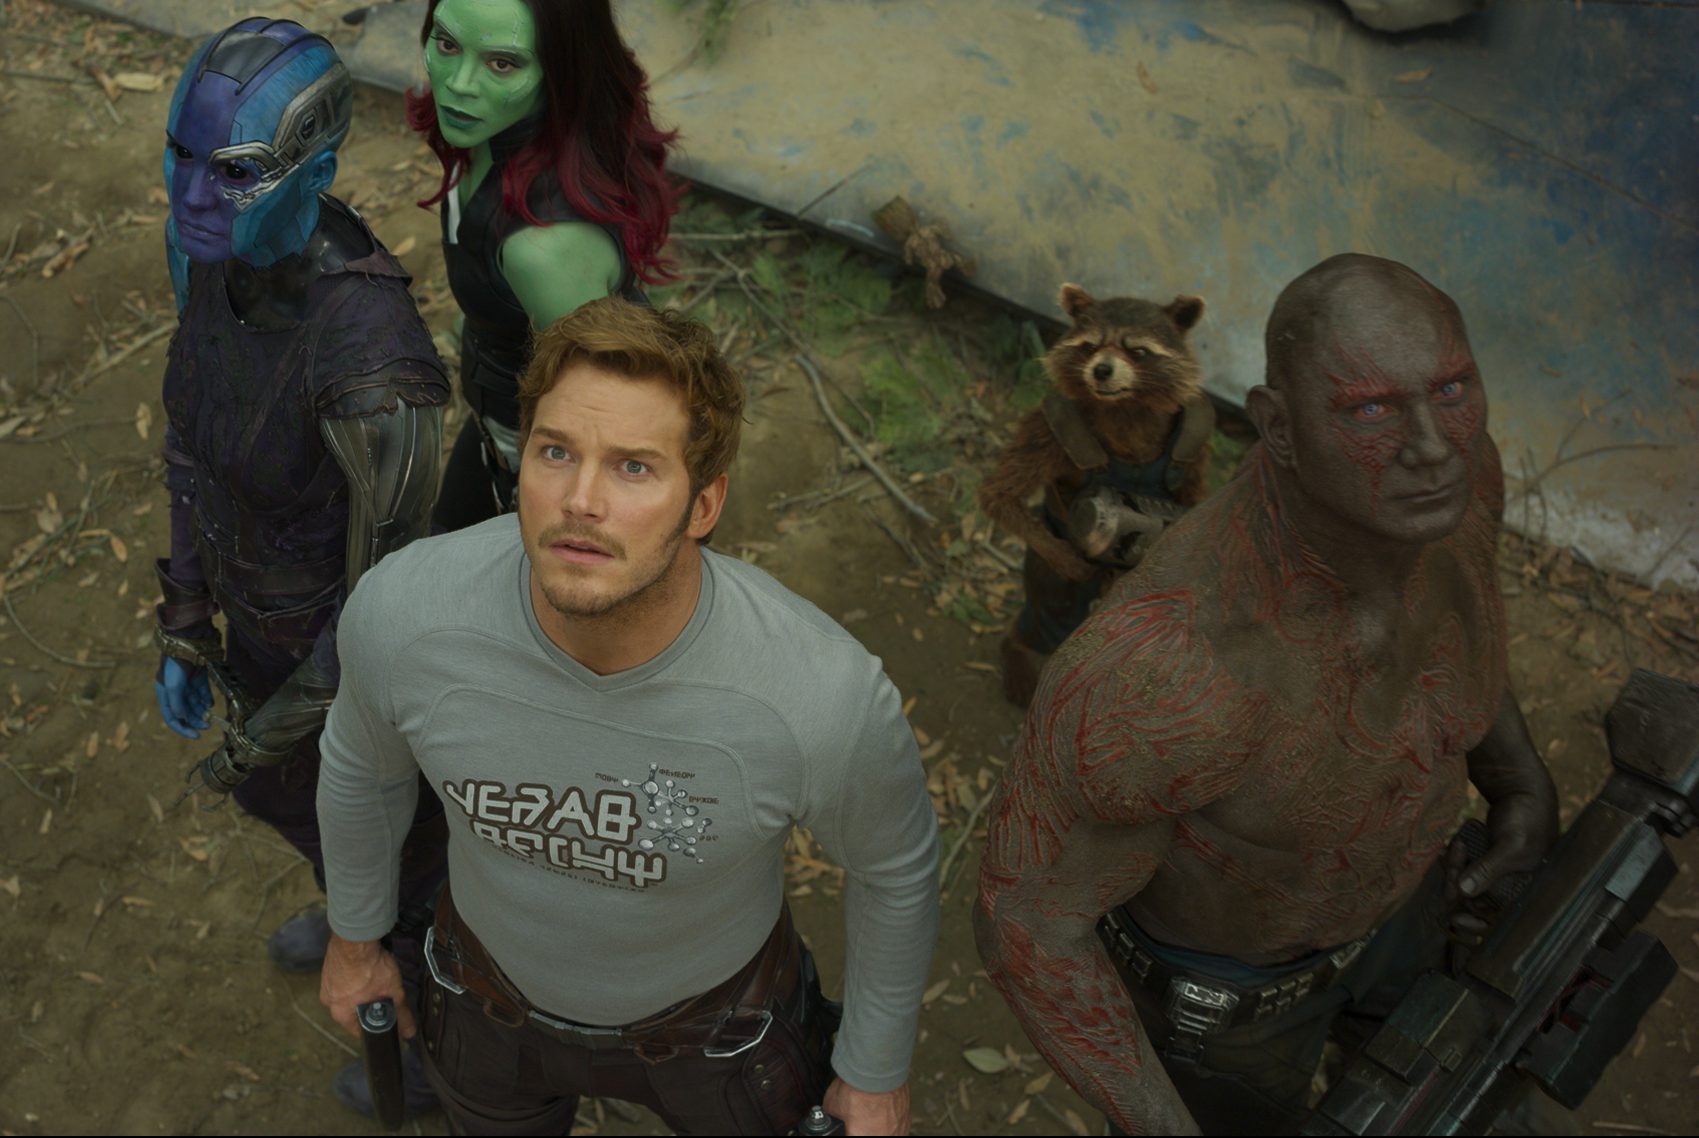 Michael Mann Says ‘Guardians of the Galaxy’ Had a ‘Really, Really Well Done Story Structure’